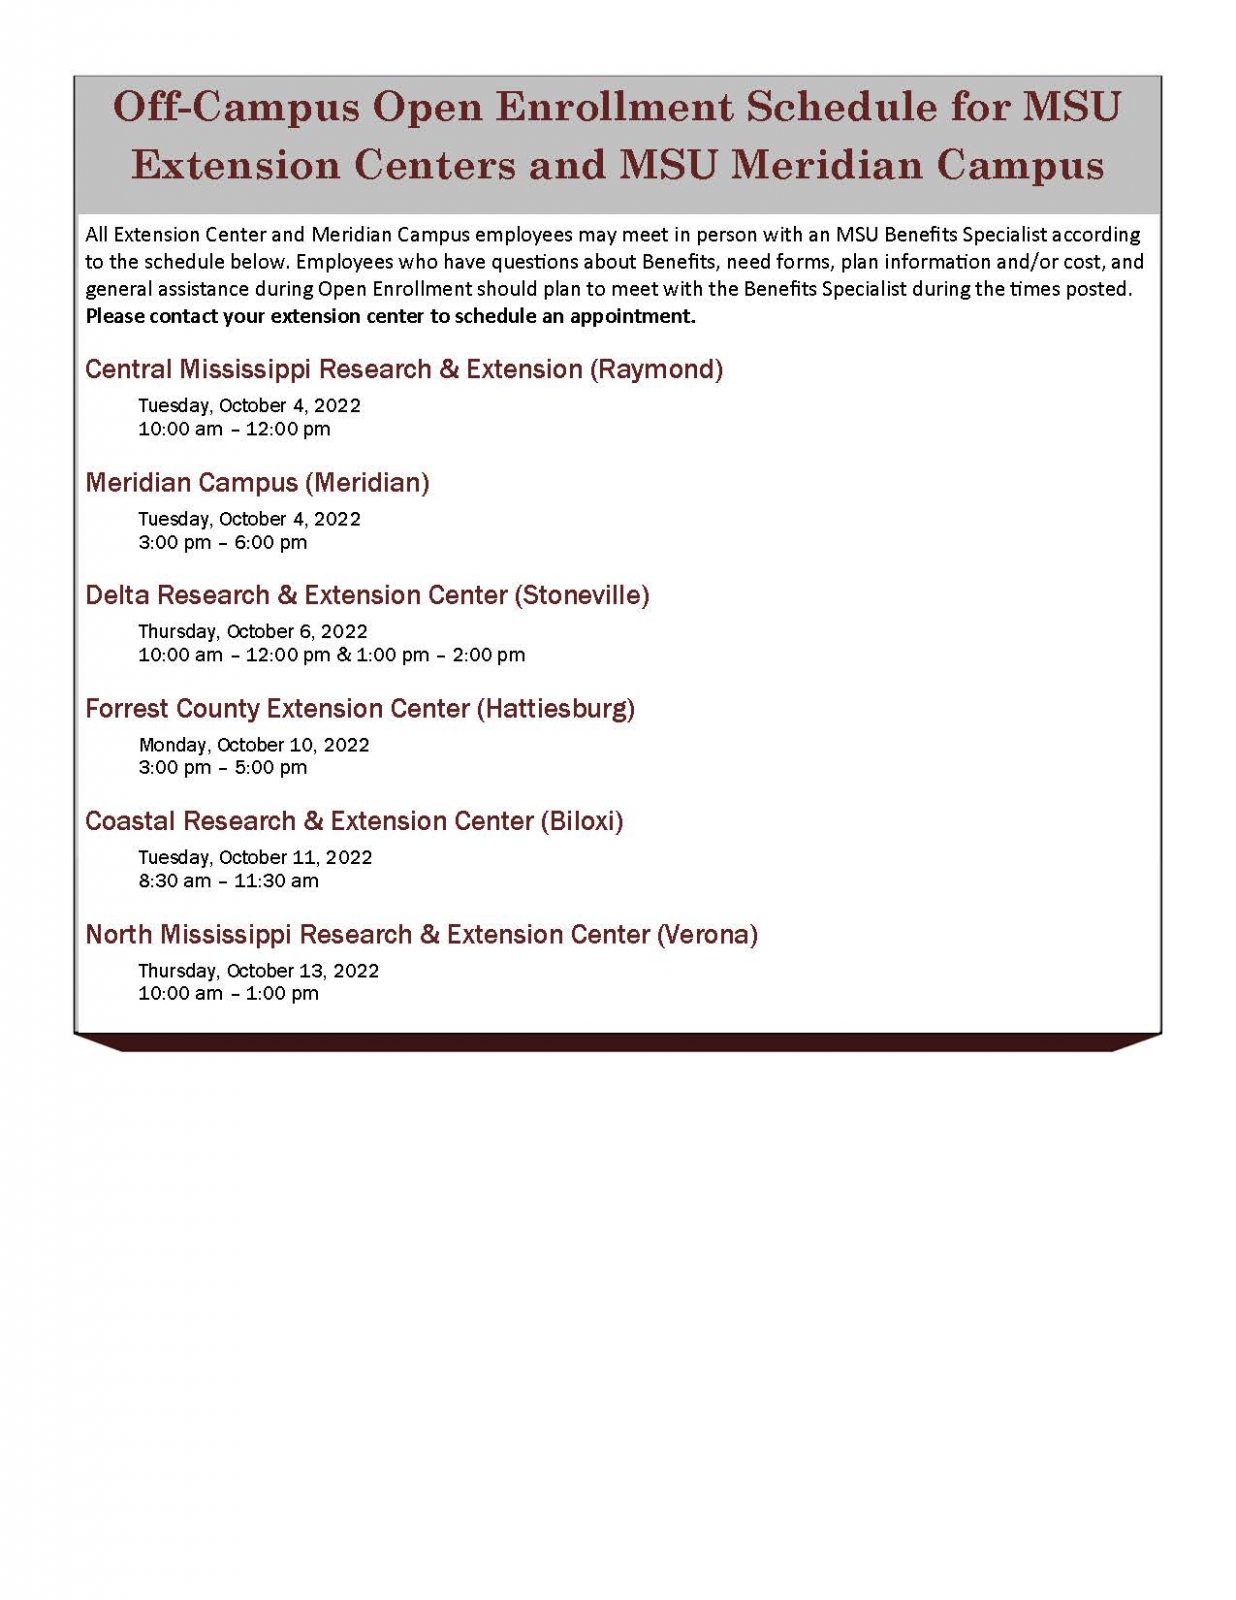 Schedule for Open Enrollment Sessions